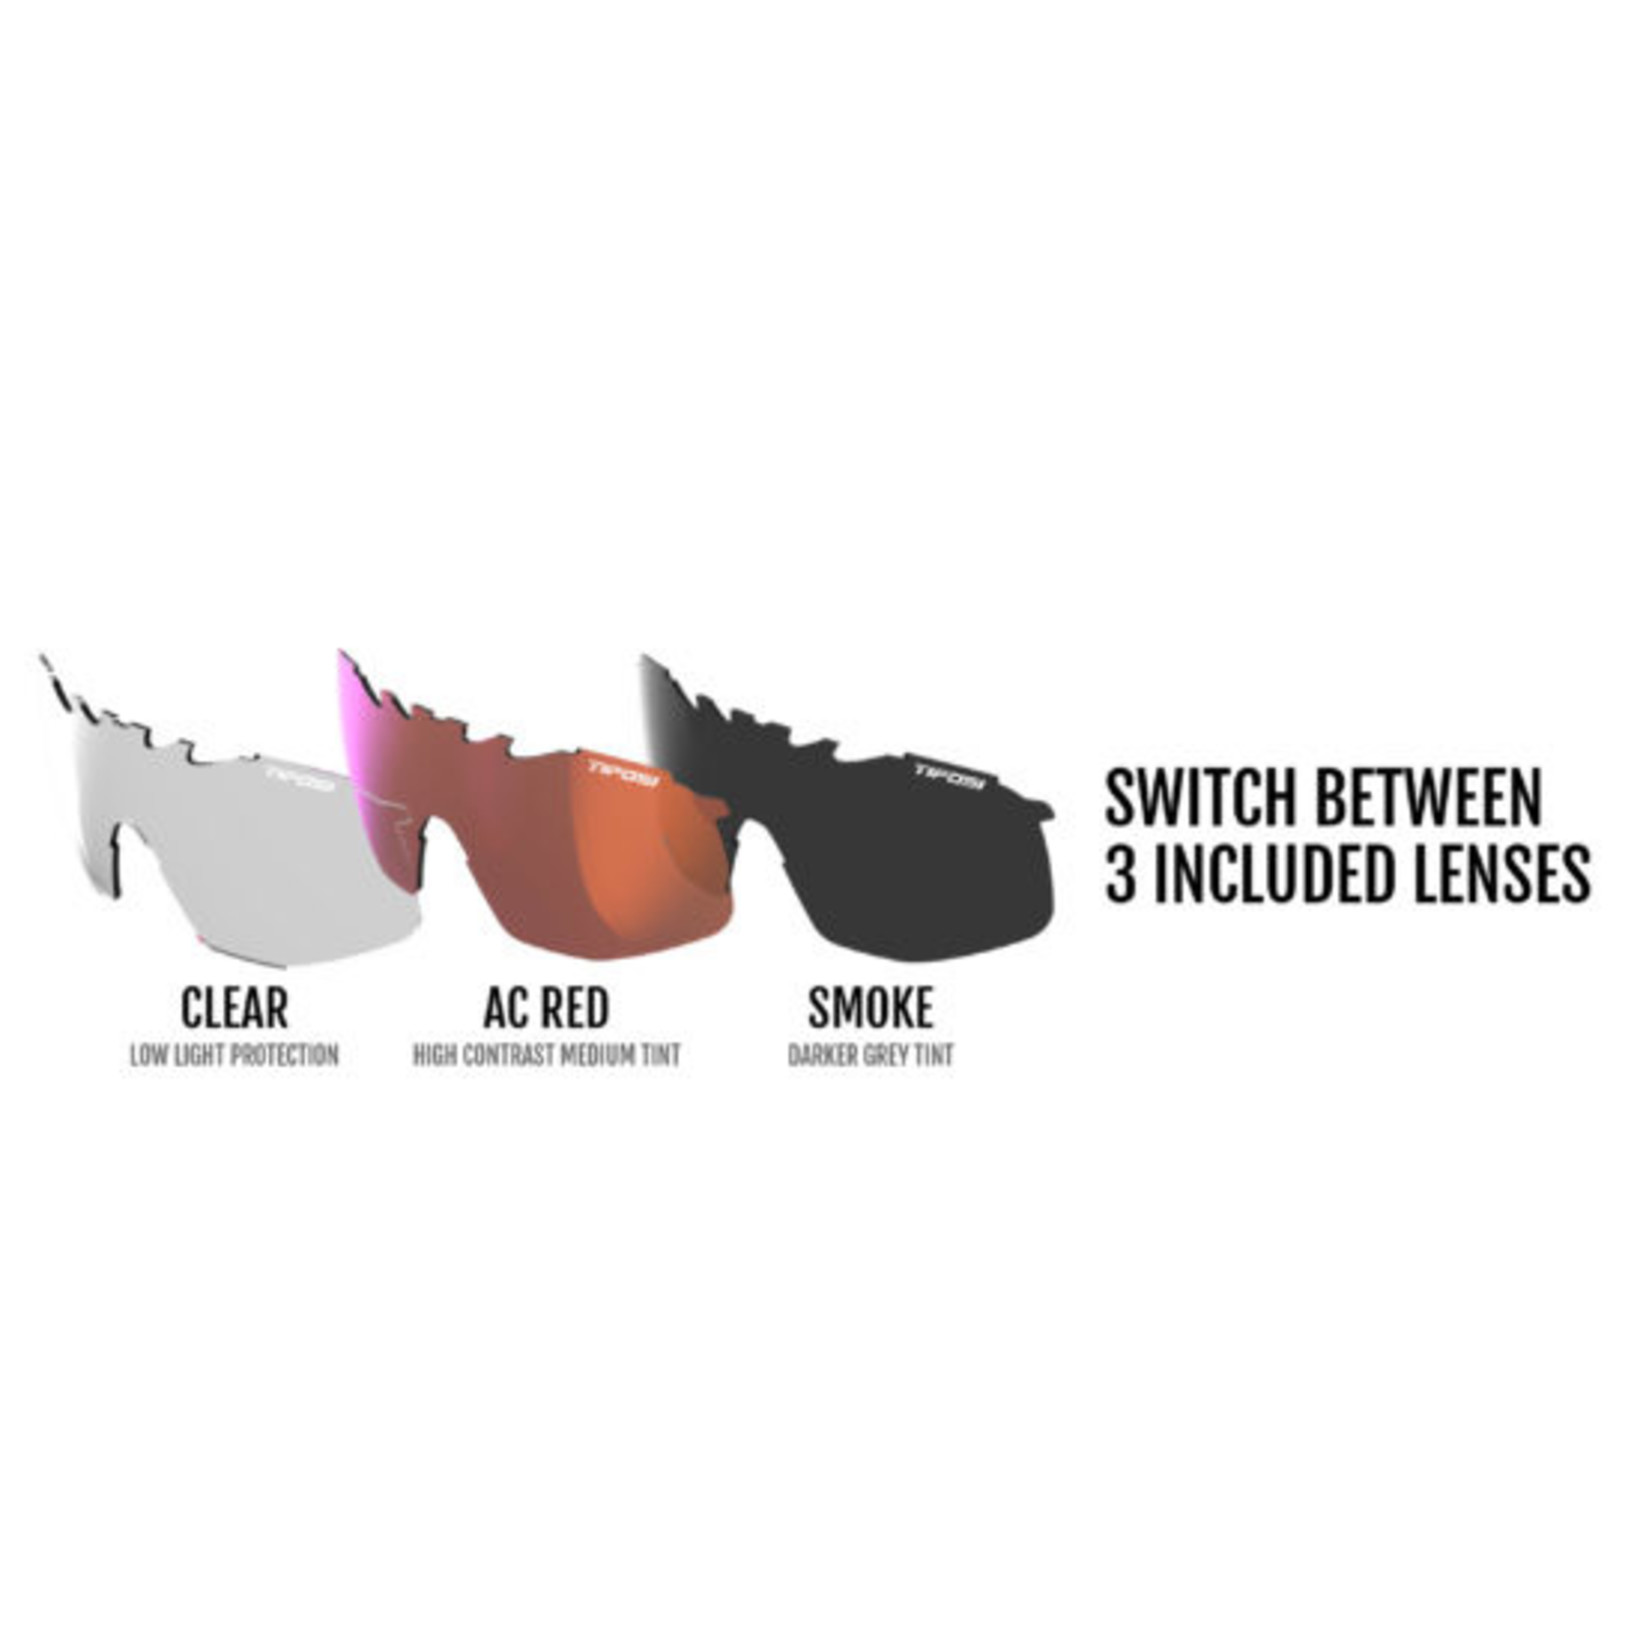 tifosi Smoke/AC Red/Clear, Sledge, Matte White Interchangeable Sunglasses. Type: Interchangeable